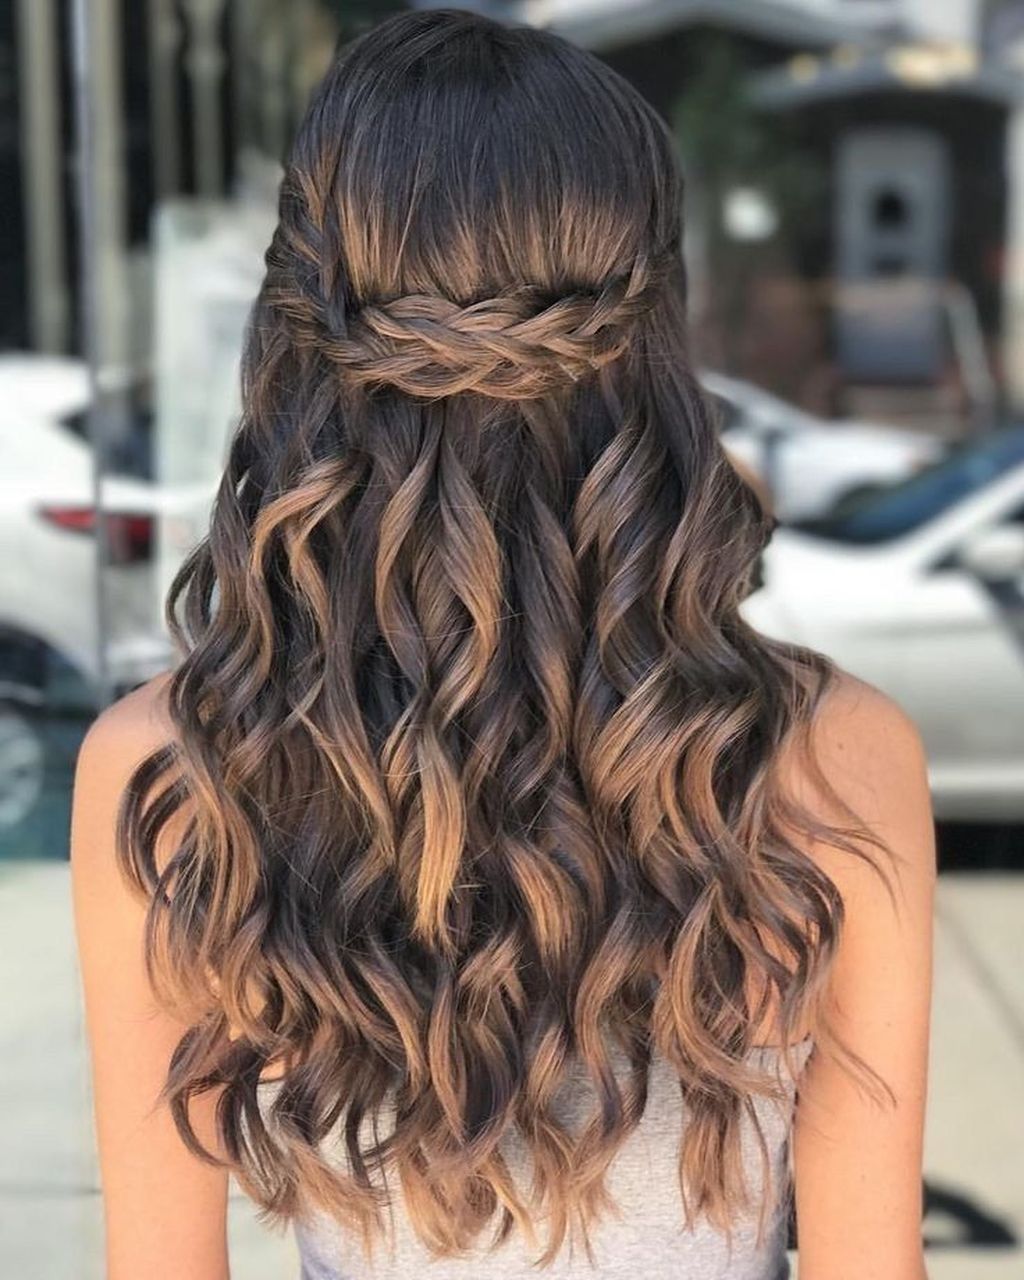 40 Pretty Prom Hairstyle Ideas For Curly Long Hair -   10 makeup Homecoming curls ideas